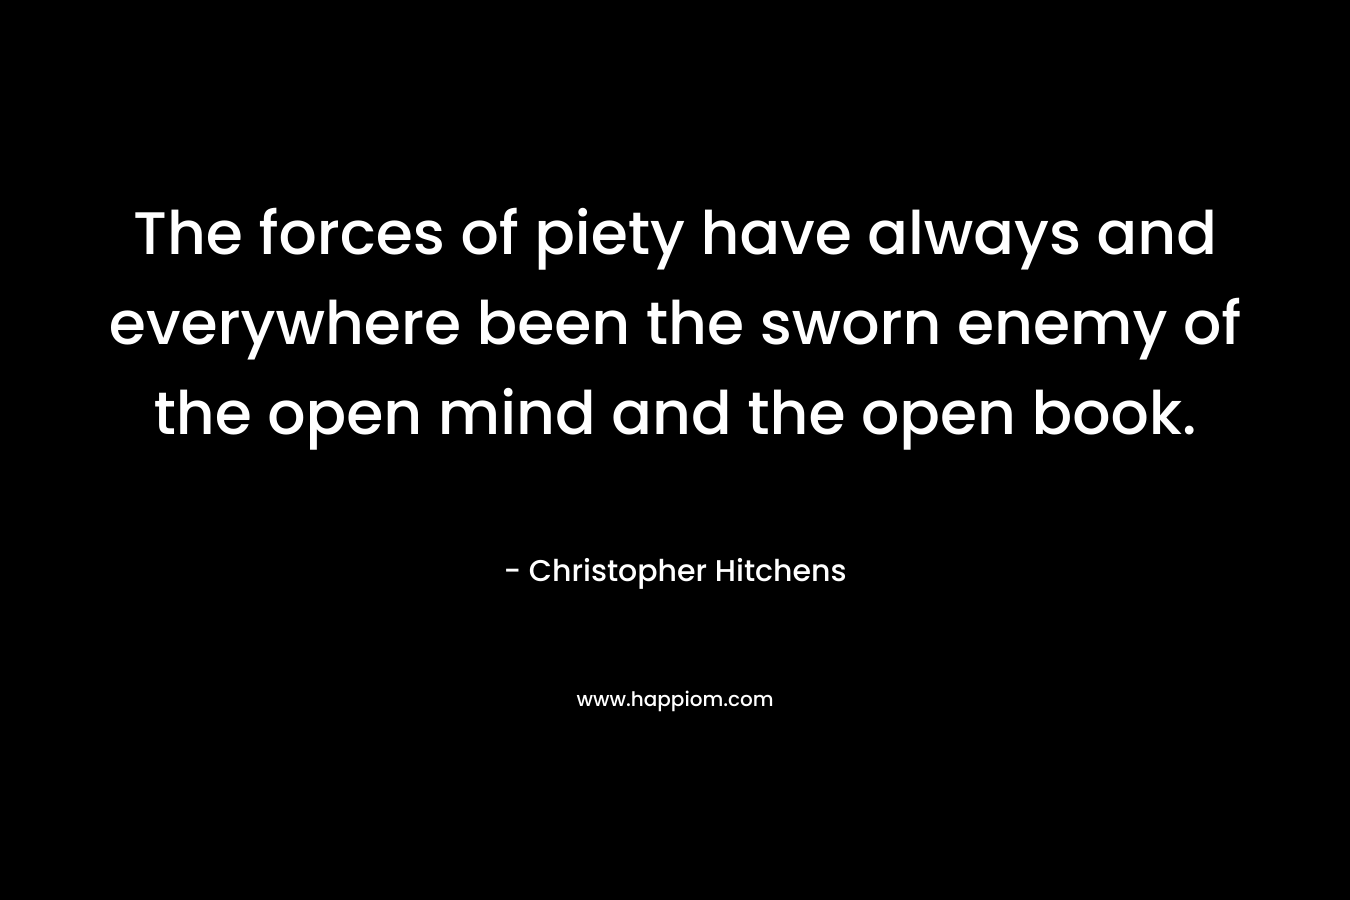 The forces of piety have always and everywhere been the sworn enemy of the open mind and the open book. – Christopher Hitchens